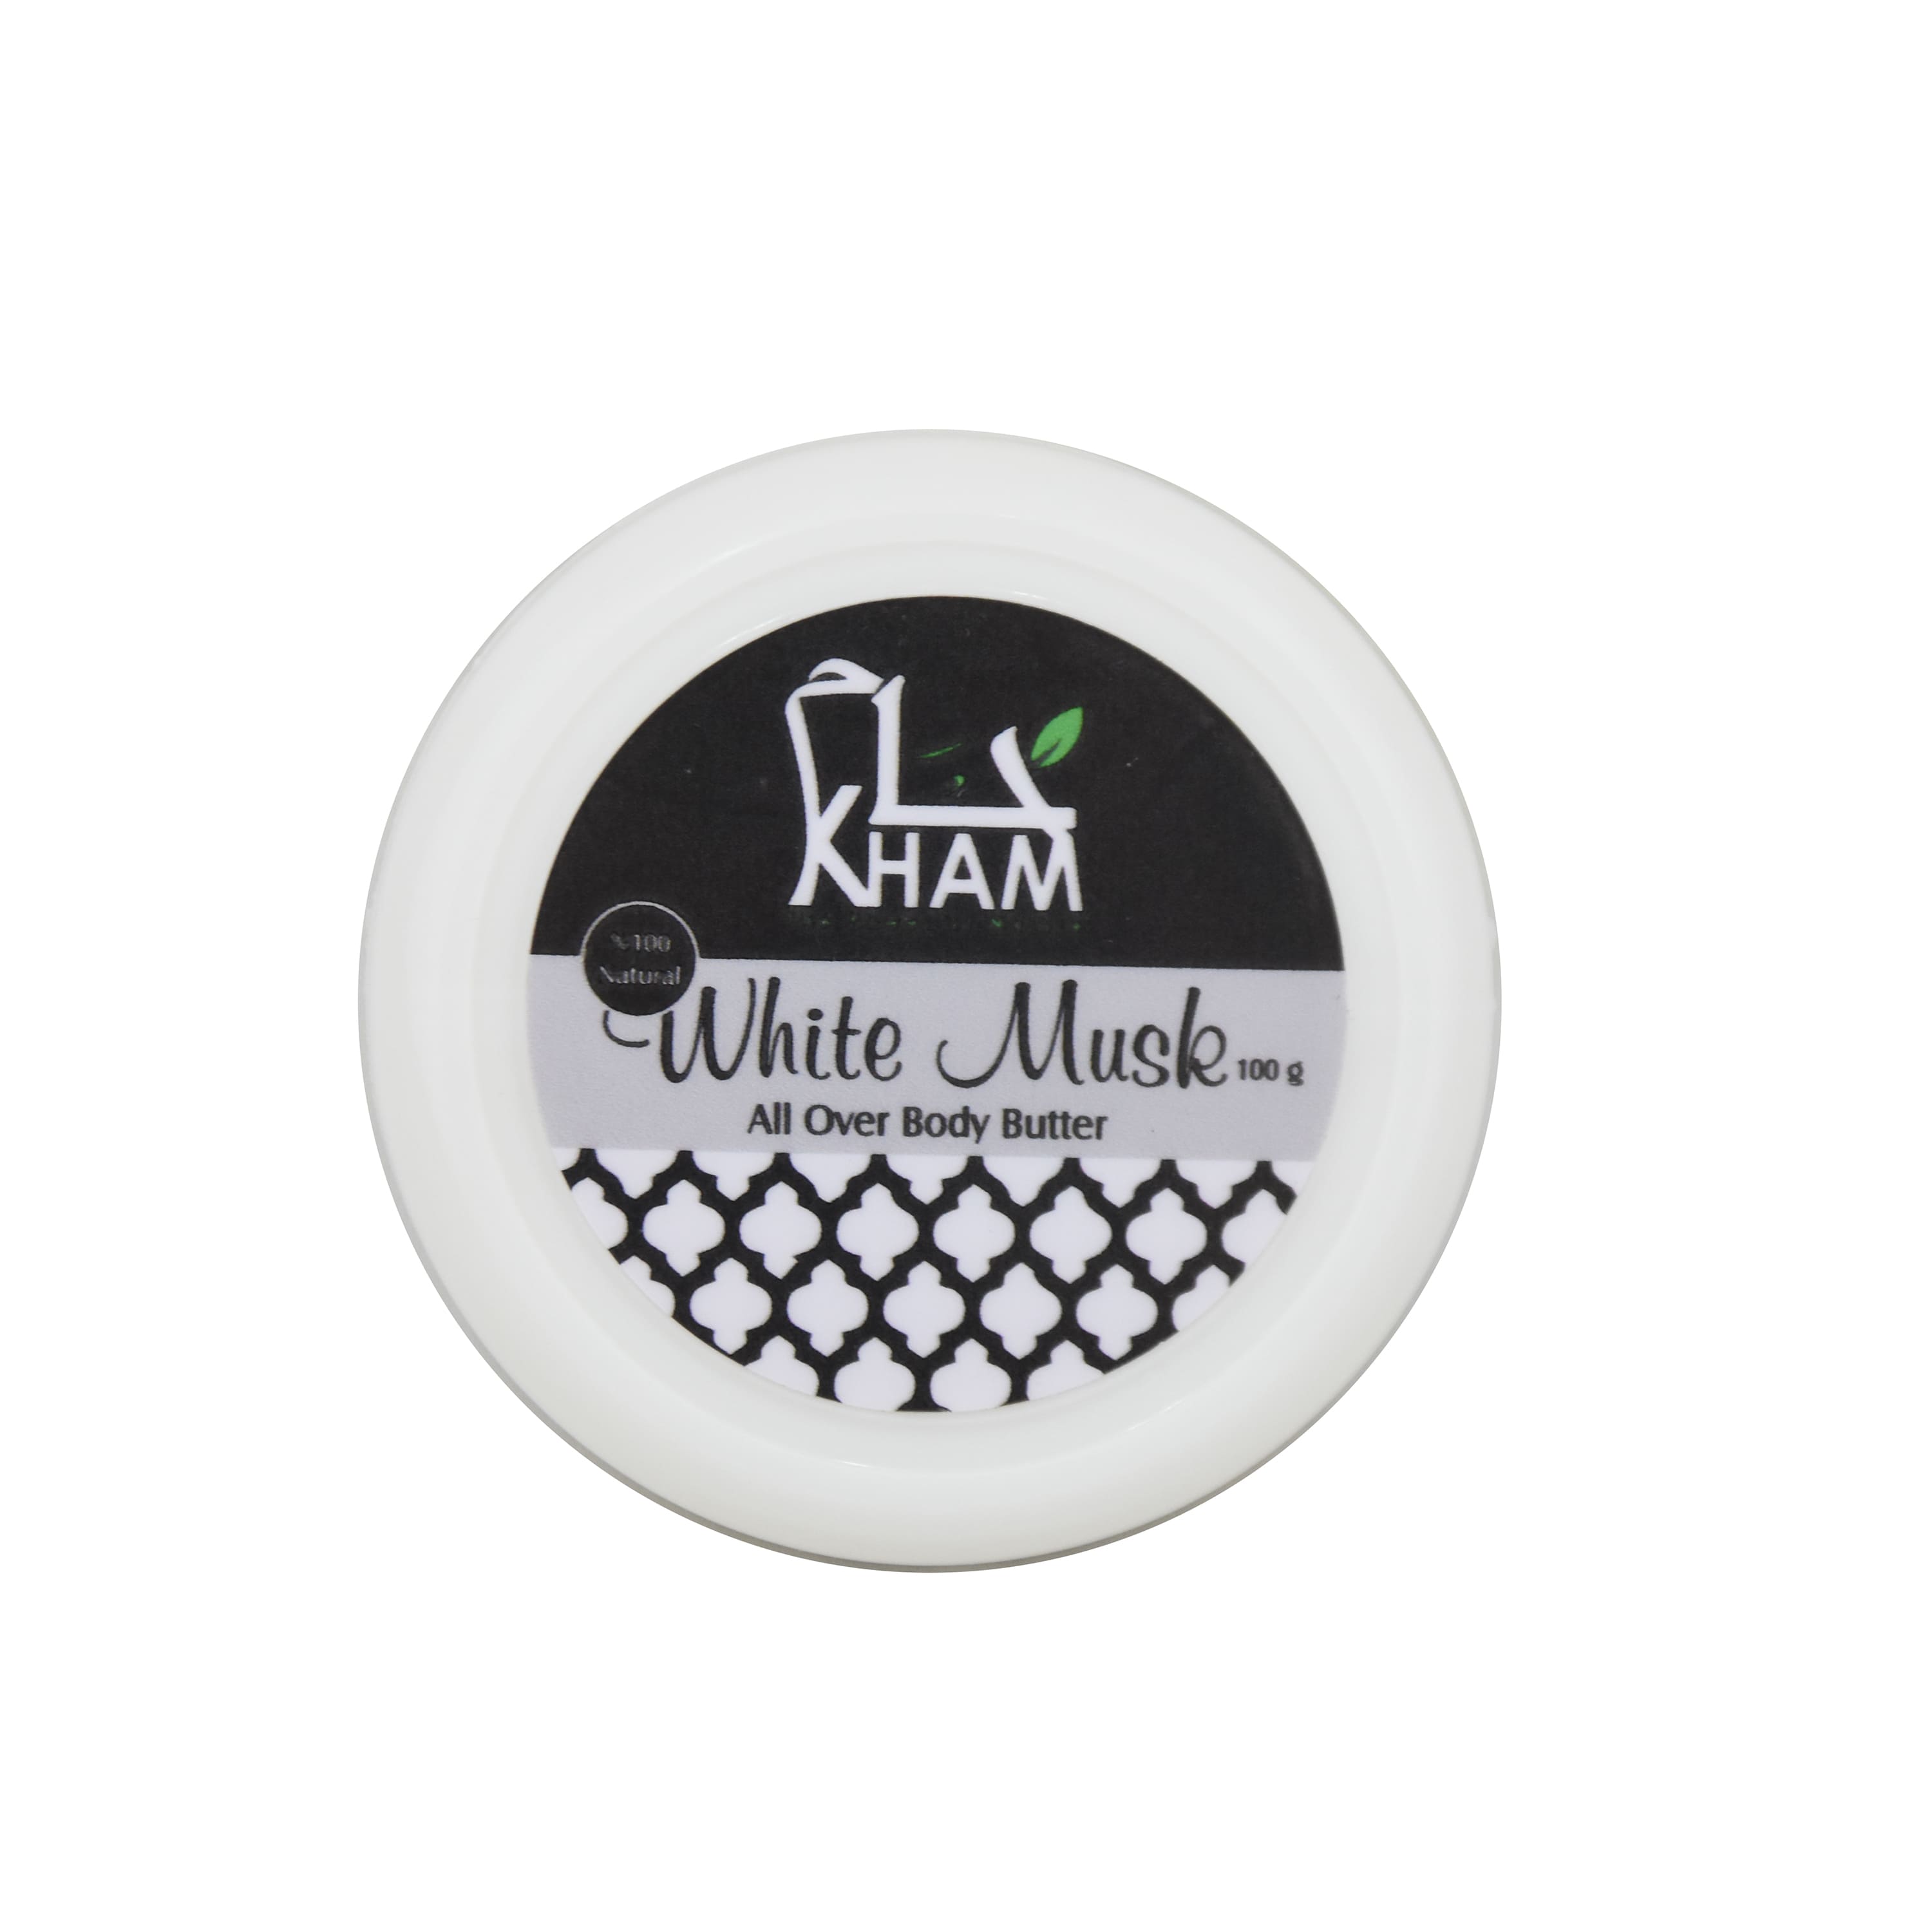 Kham White Musk Body Butter (100 gm) to moisturize and soften the body a strong characteristic odor